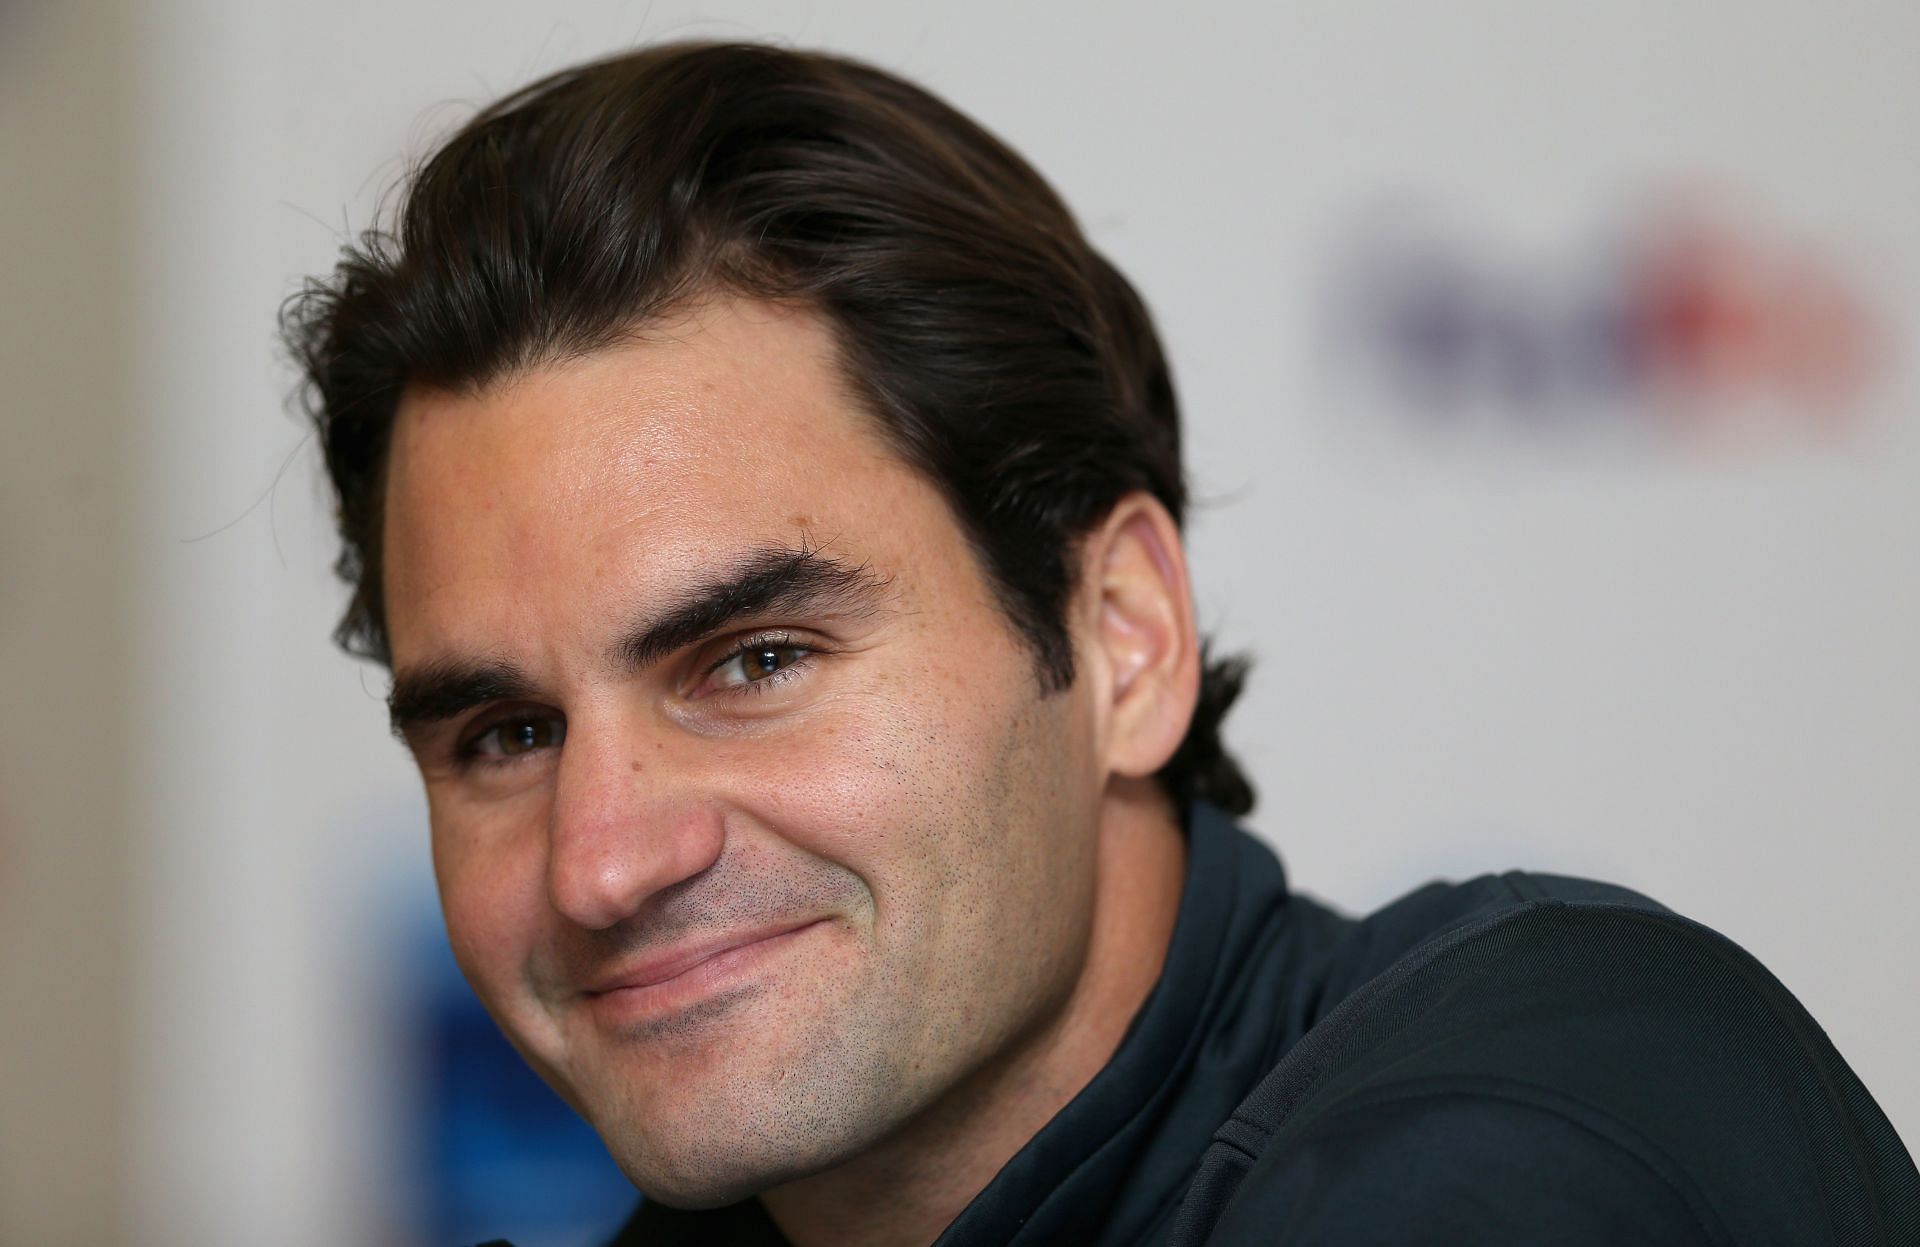 Federer claims meeting and looking at familiar faces is a great feeling